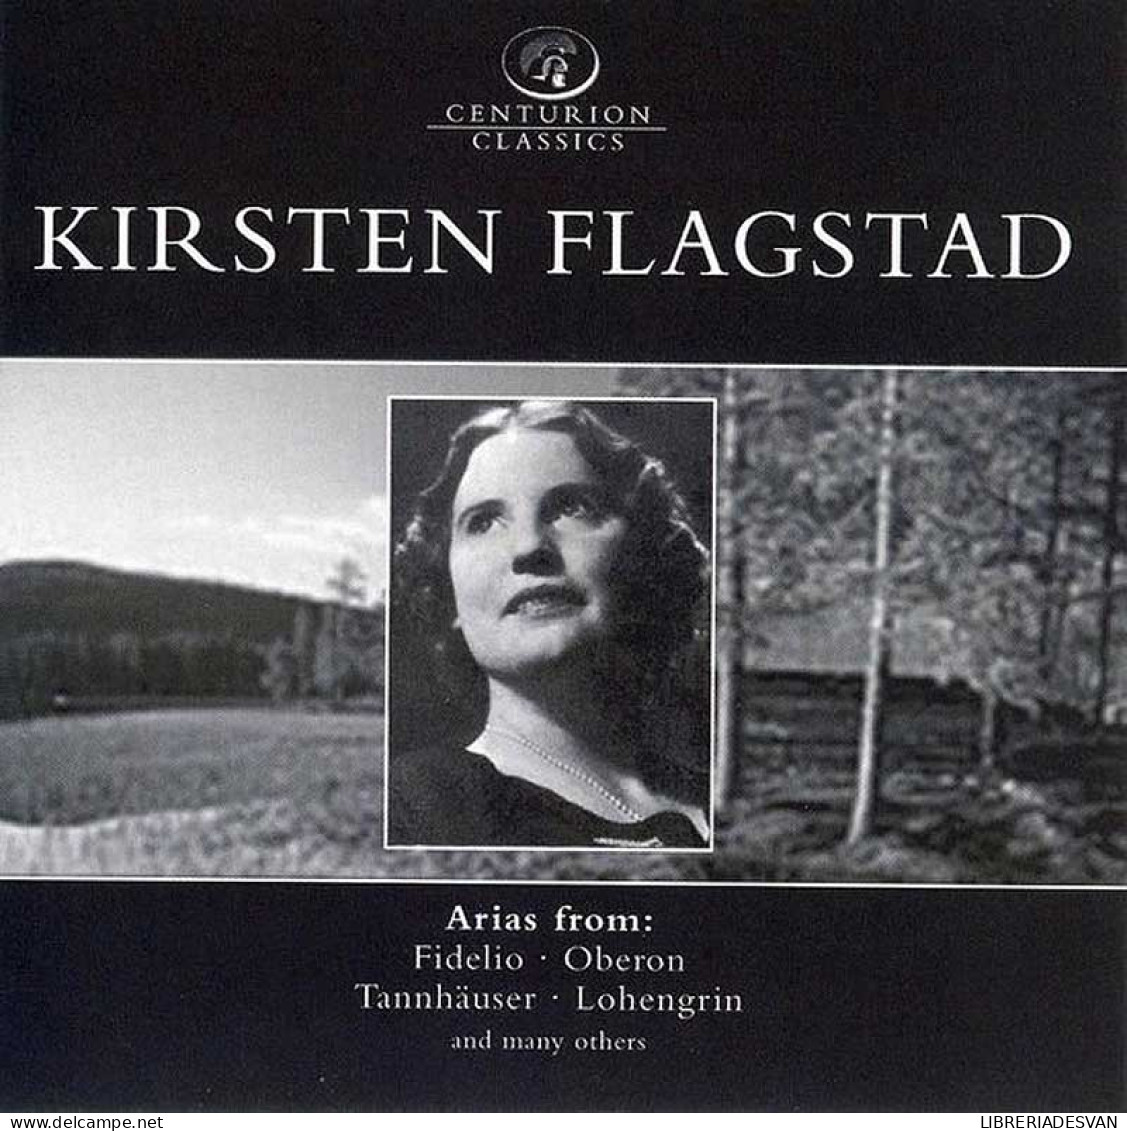 Kirsten Flagstad - Arias From: Fidelio-Oberon-Tannhäuser-Lohengrin And Many Others. CD - Classical